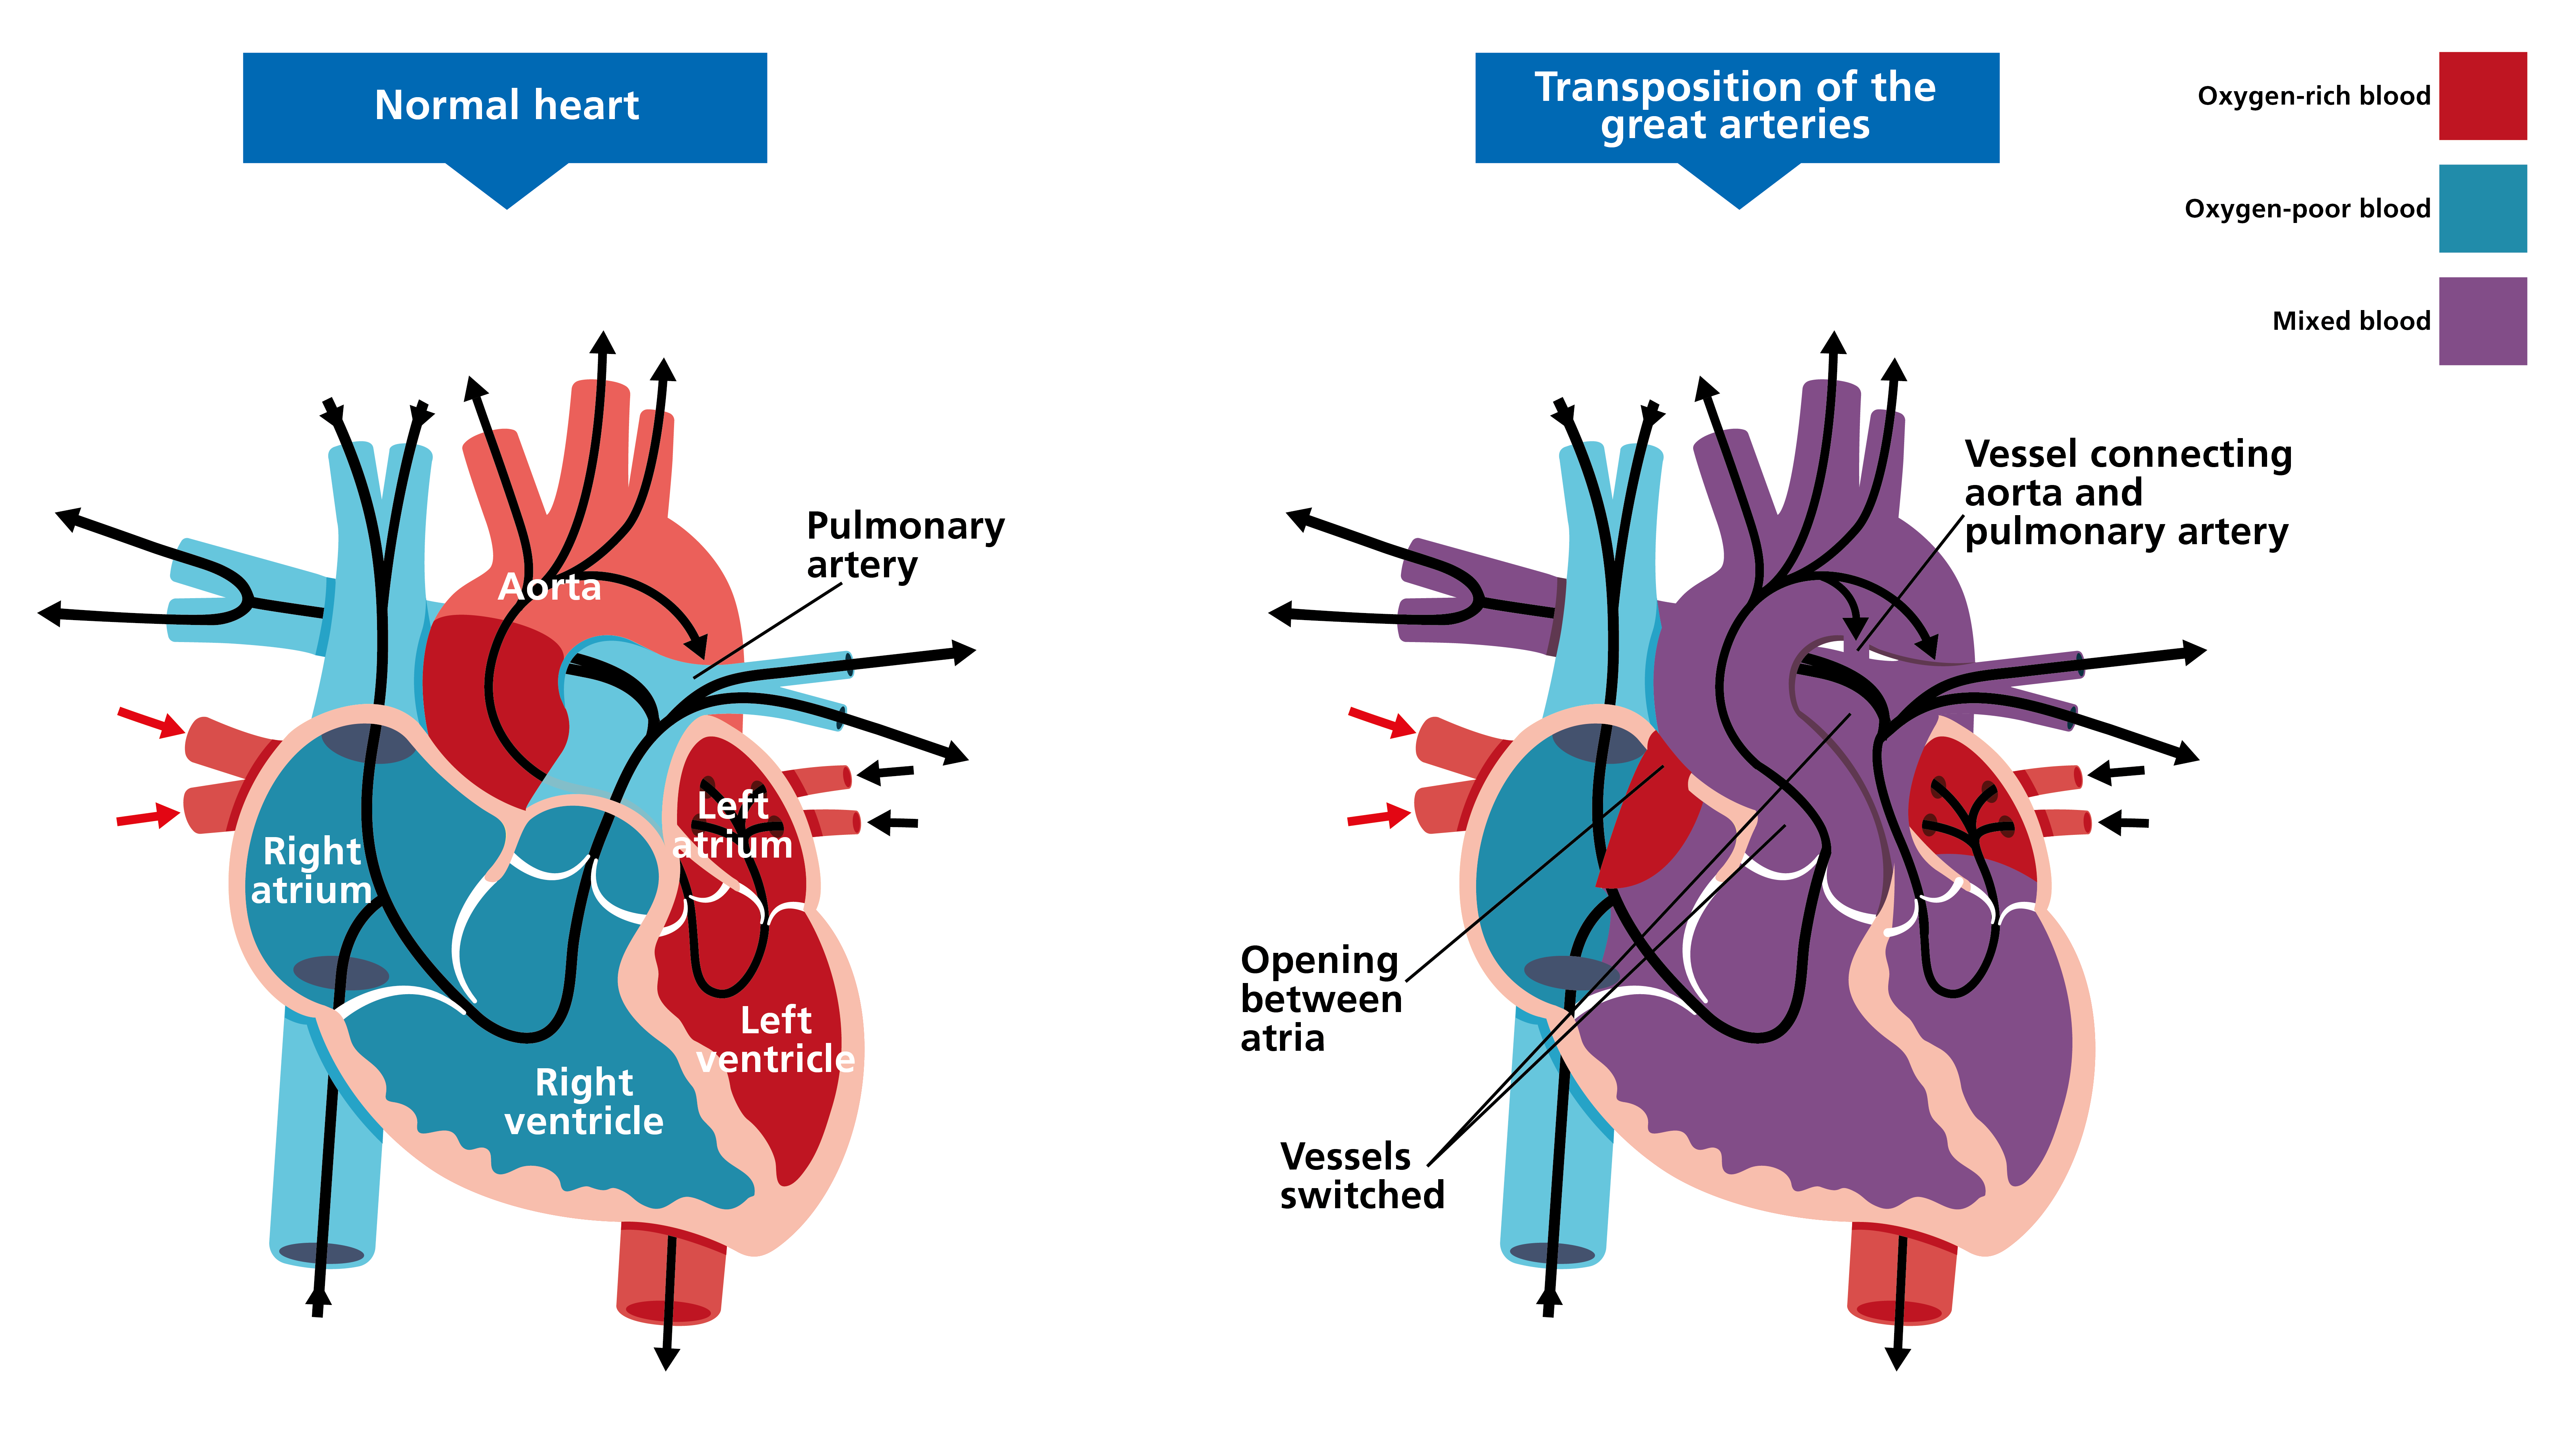 Two illustrated diagrams of hearts, side by side. The one on the left shows a normal heart. The one on the right shows a heart affected by transposition of the great arteries. Features of the affected heart include an opening between the atria, vessels switched, and a vessel connecting the aorta and the pulmonary artery.